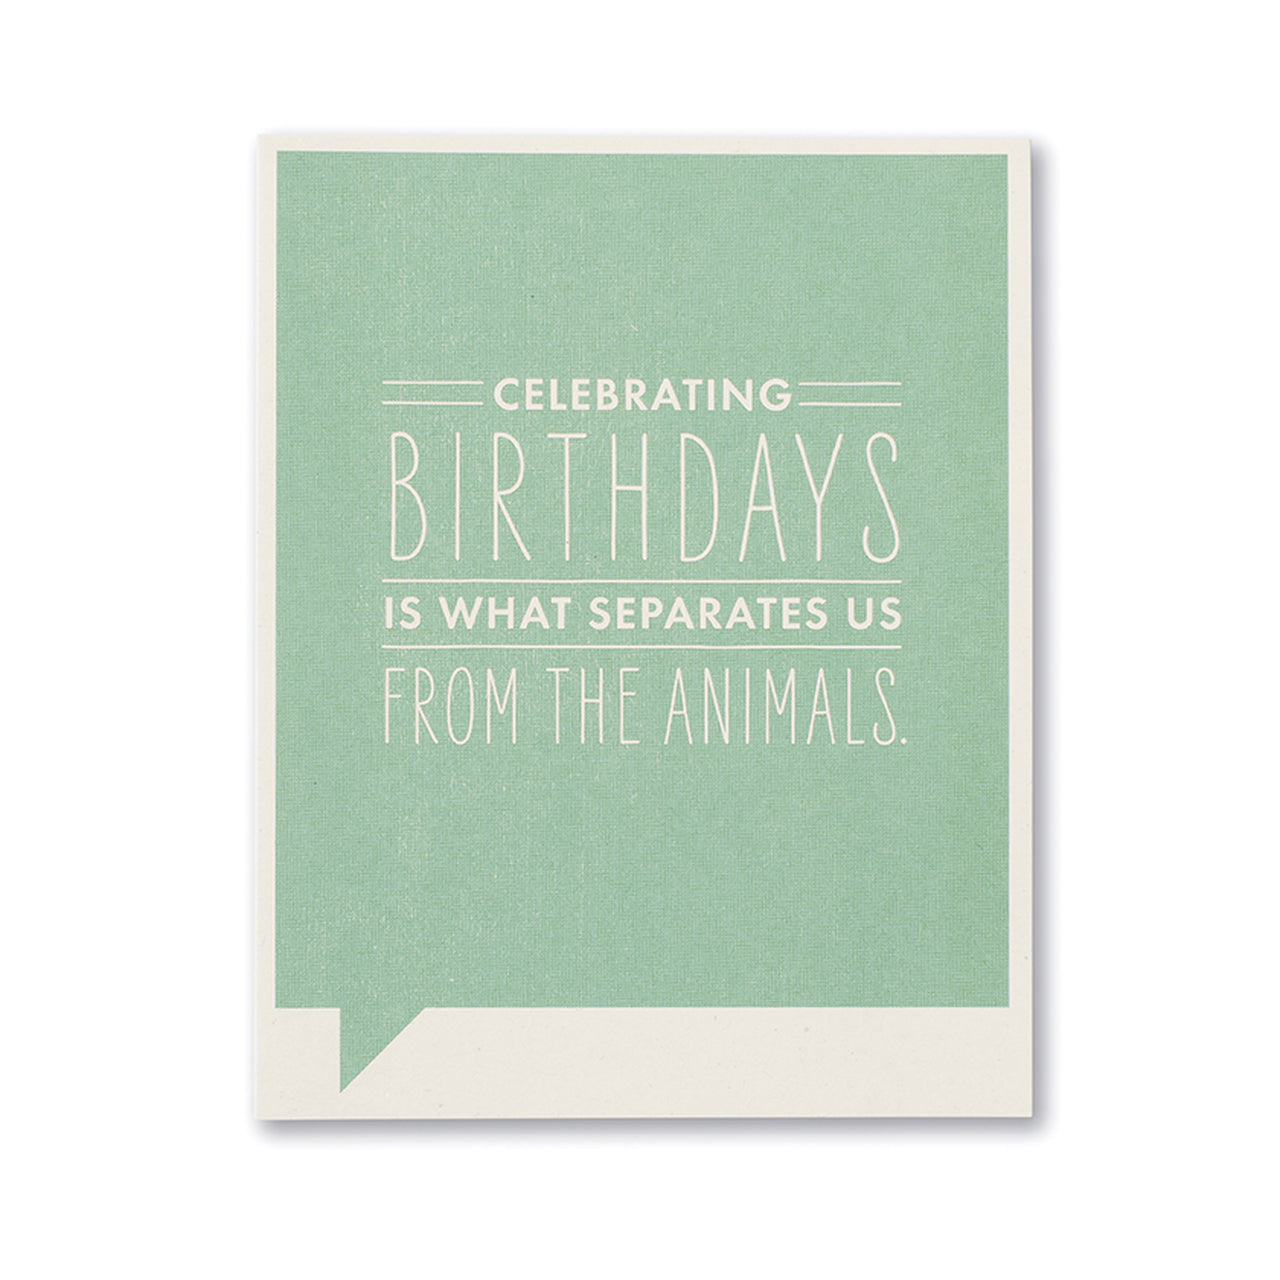 Frank and Funny Greeting Card - Birthday - Celebrating Birthdays Is What Separates Us From The Animals - Mellow Monkey